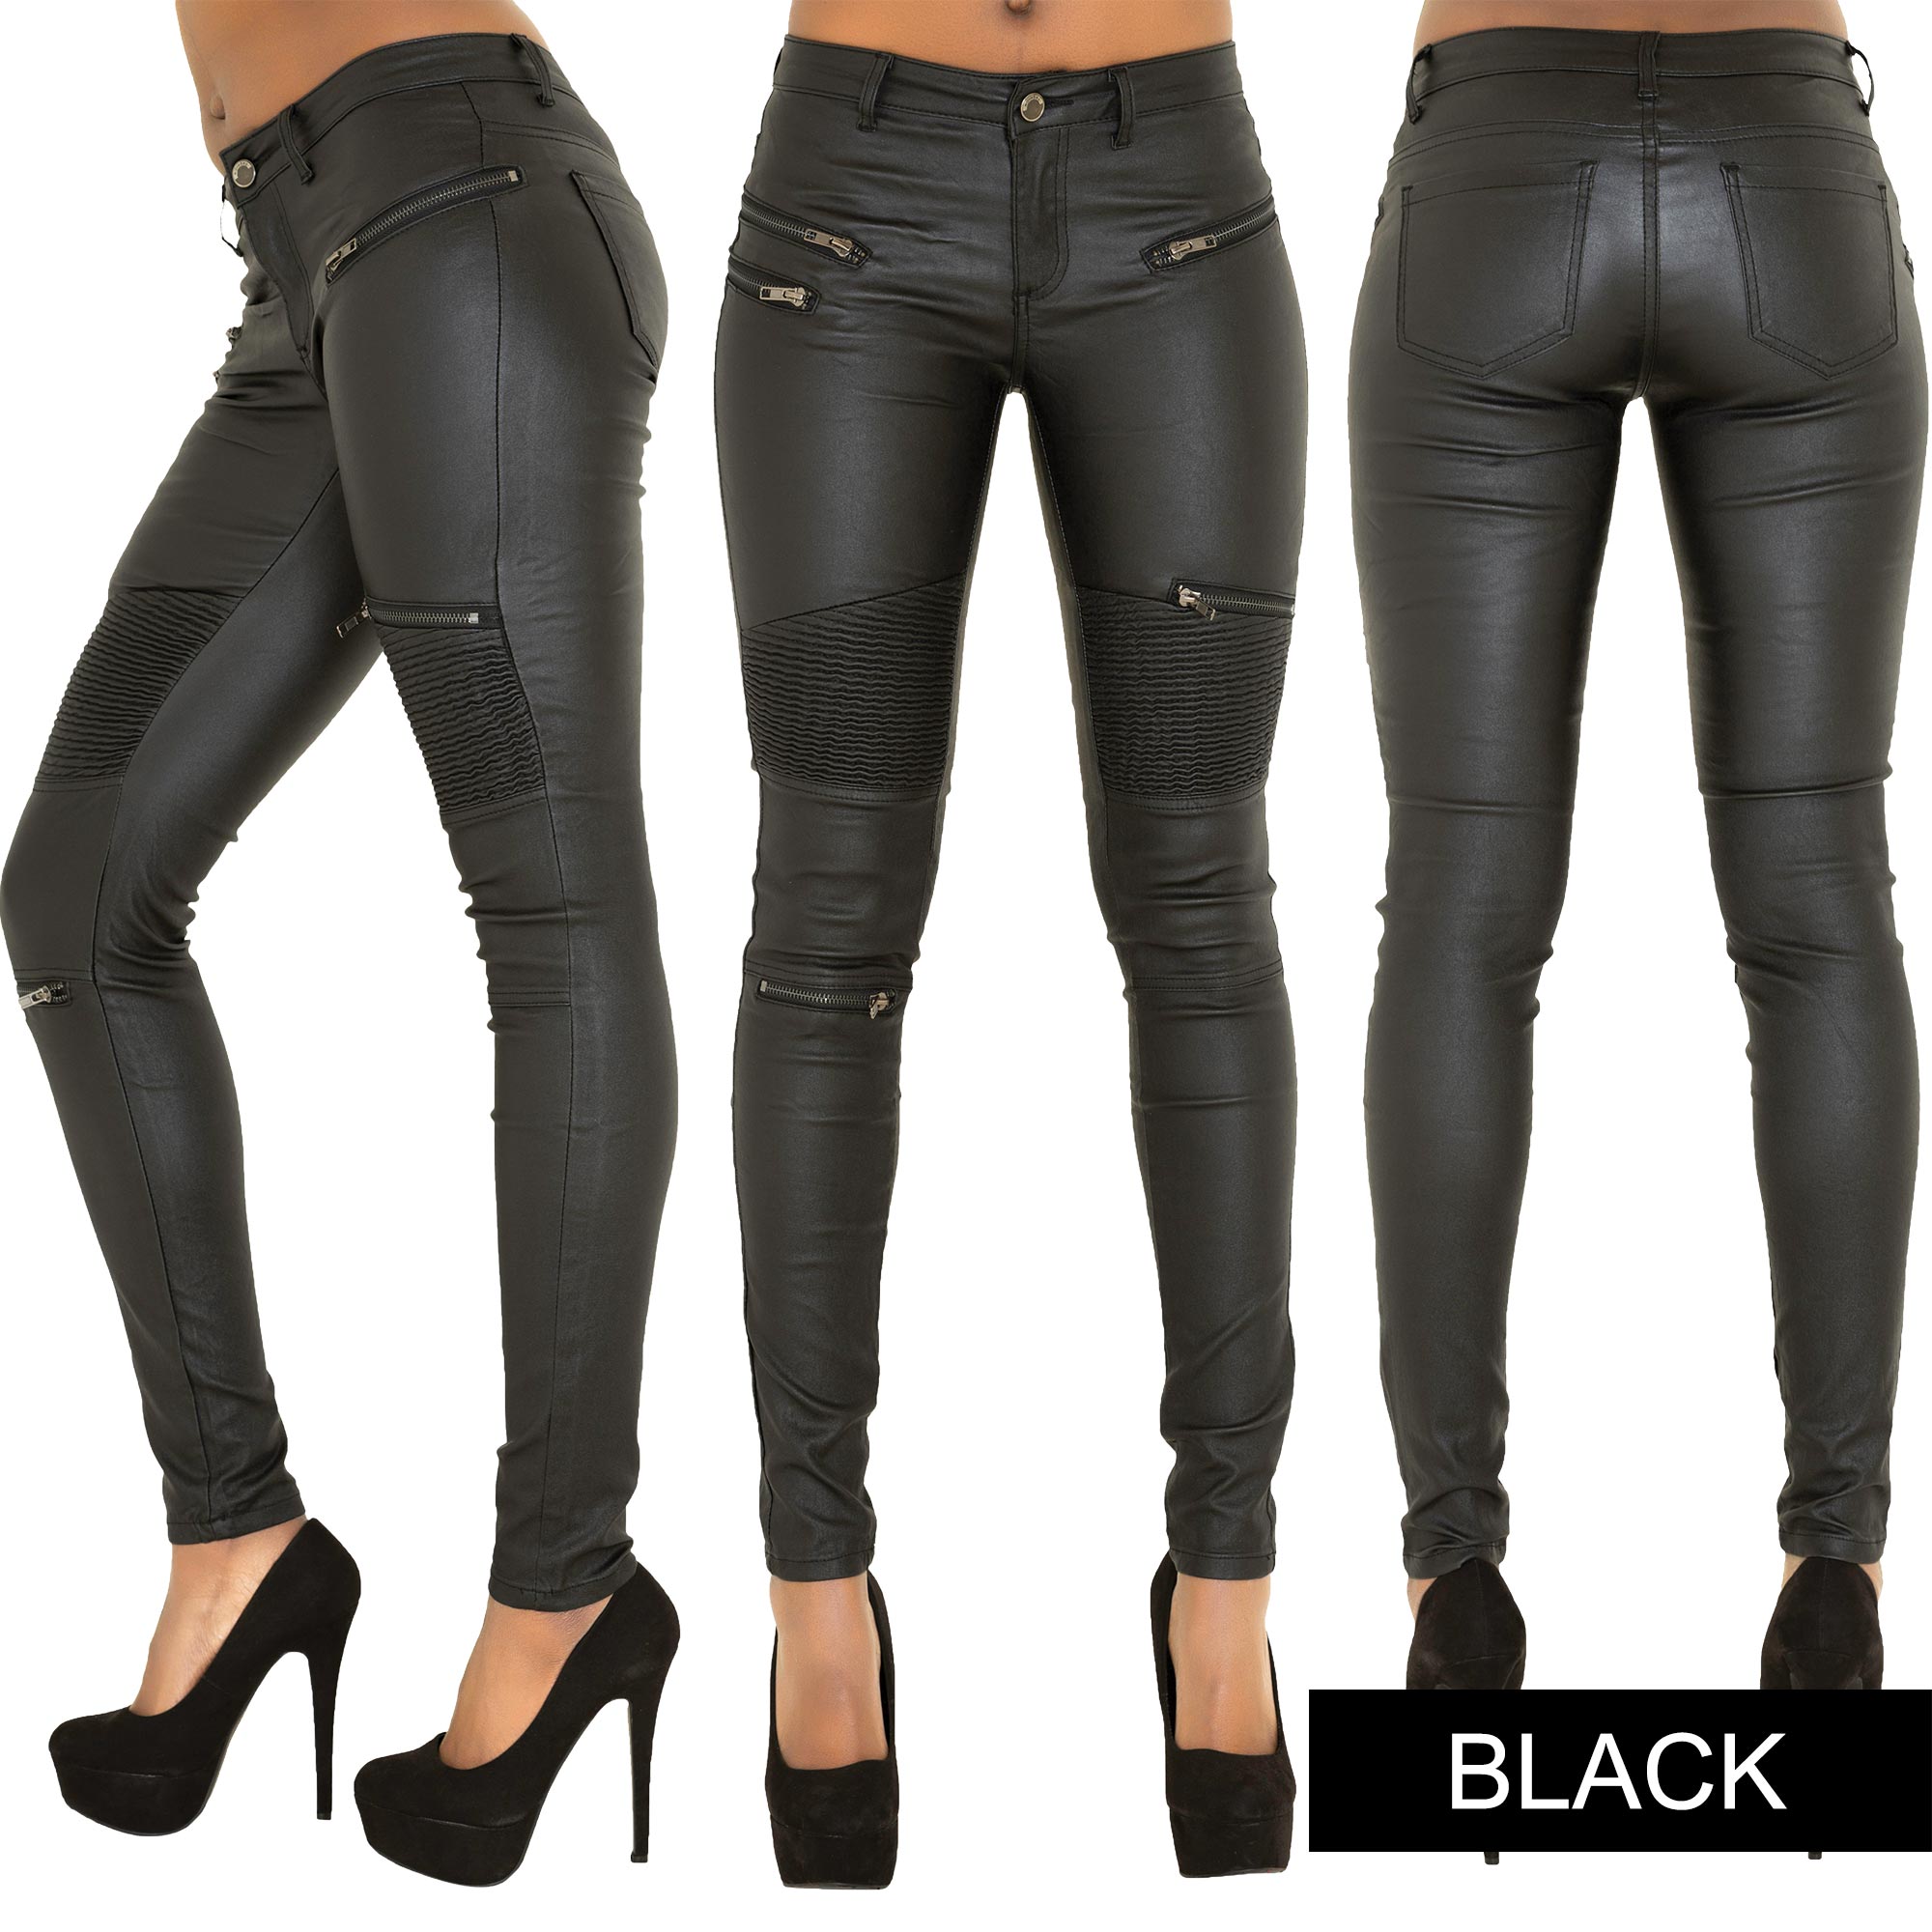 Ladies Sexy Black Leather Look Jeans Womens Skinny Stretch